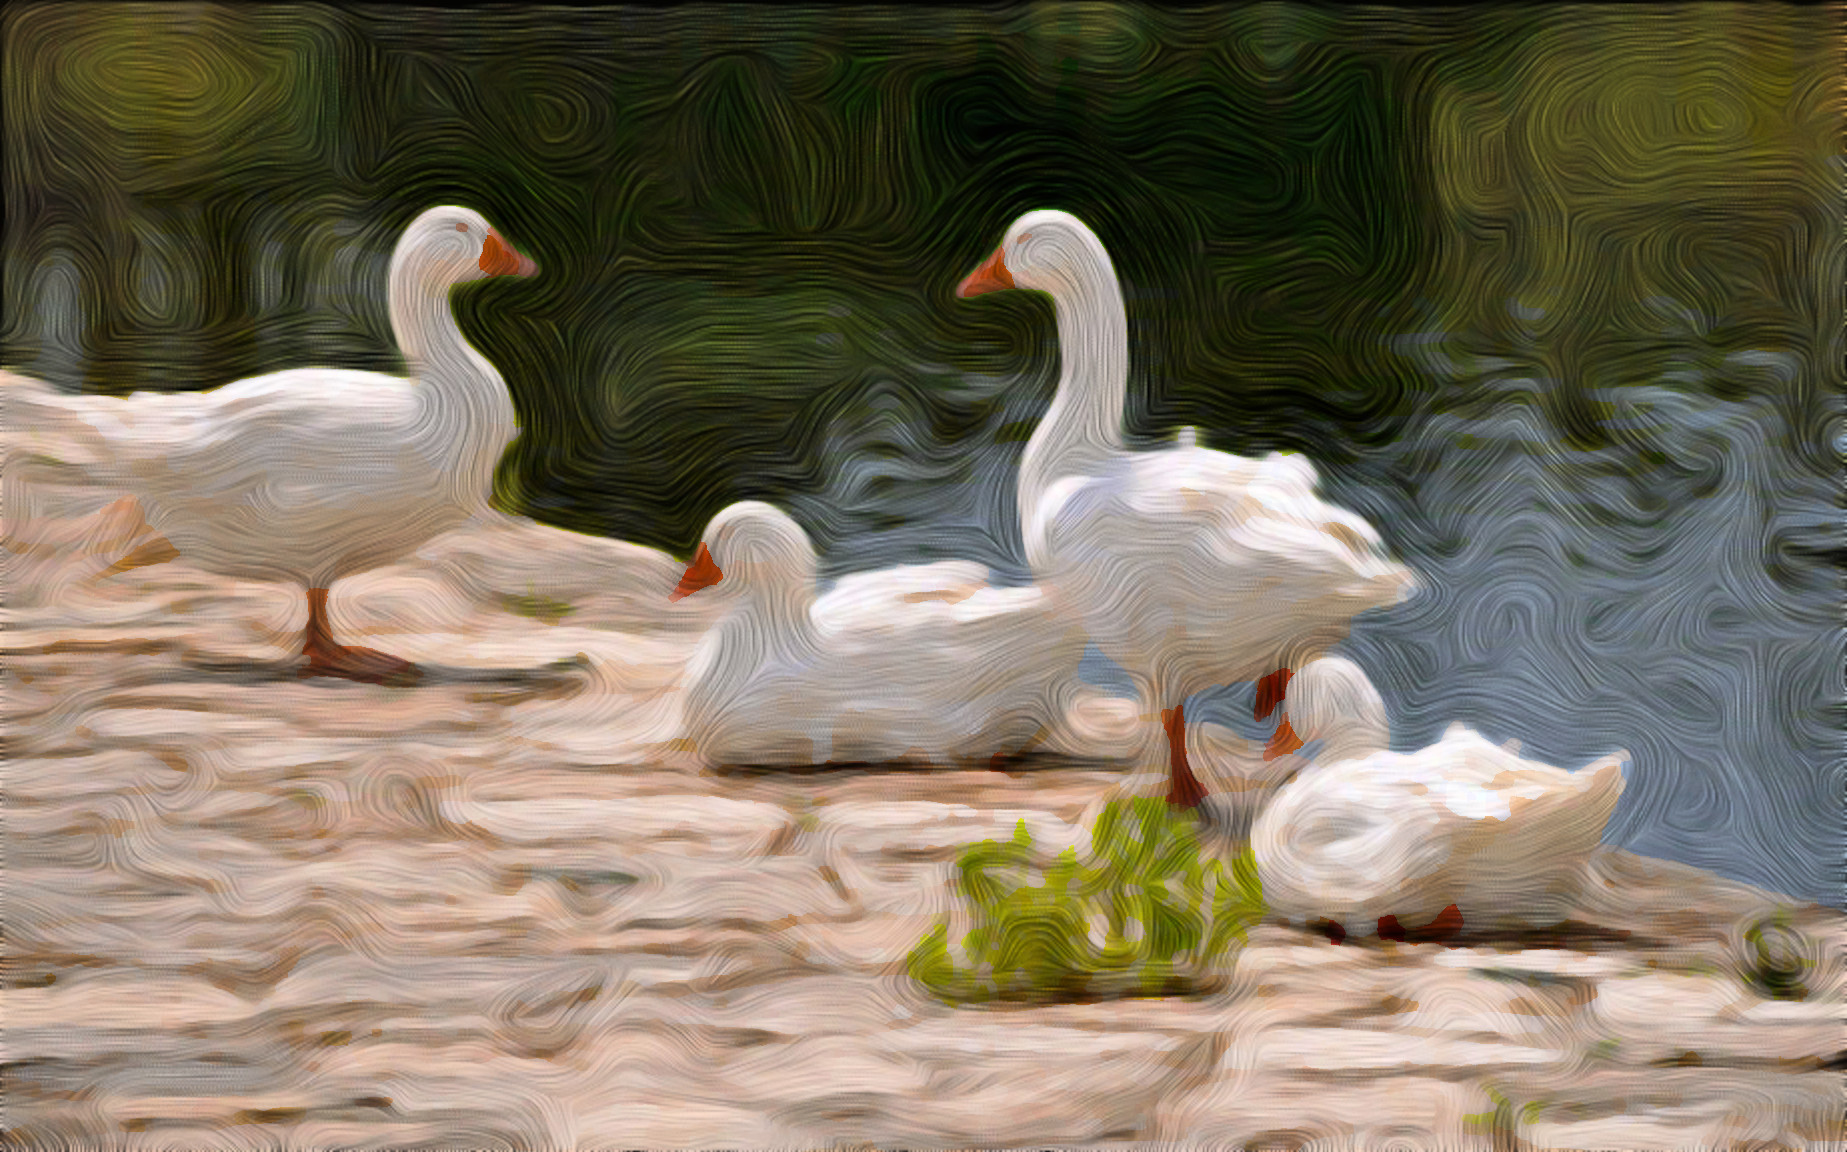 Ducks_2022-01-09 174155_DN_SimpleGraphics_FingerPaint_with colours-rayees.jpg